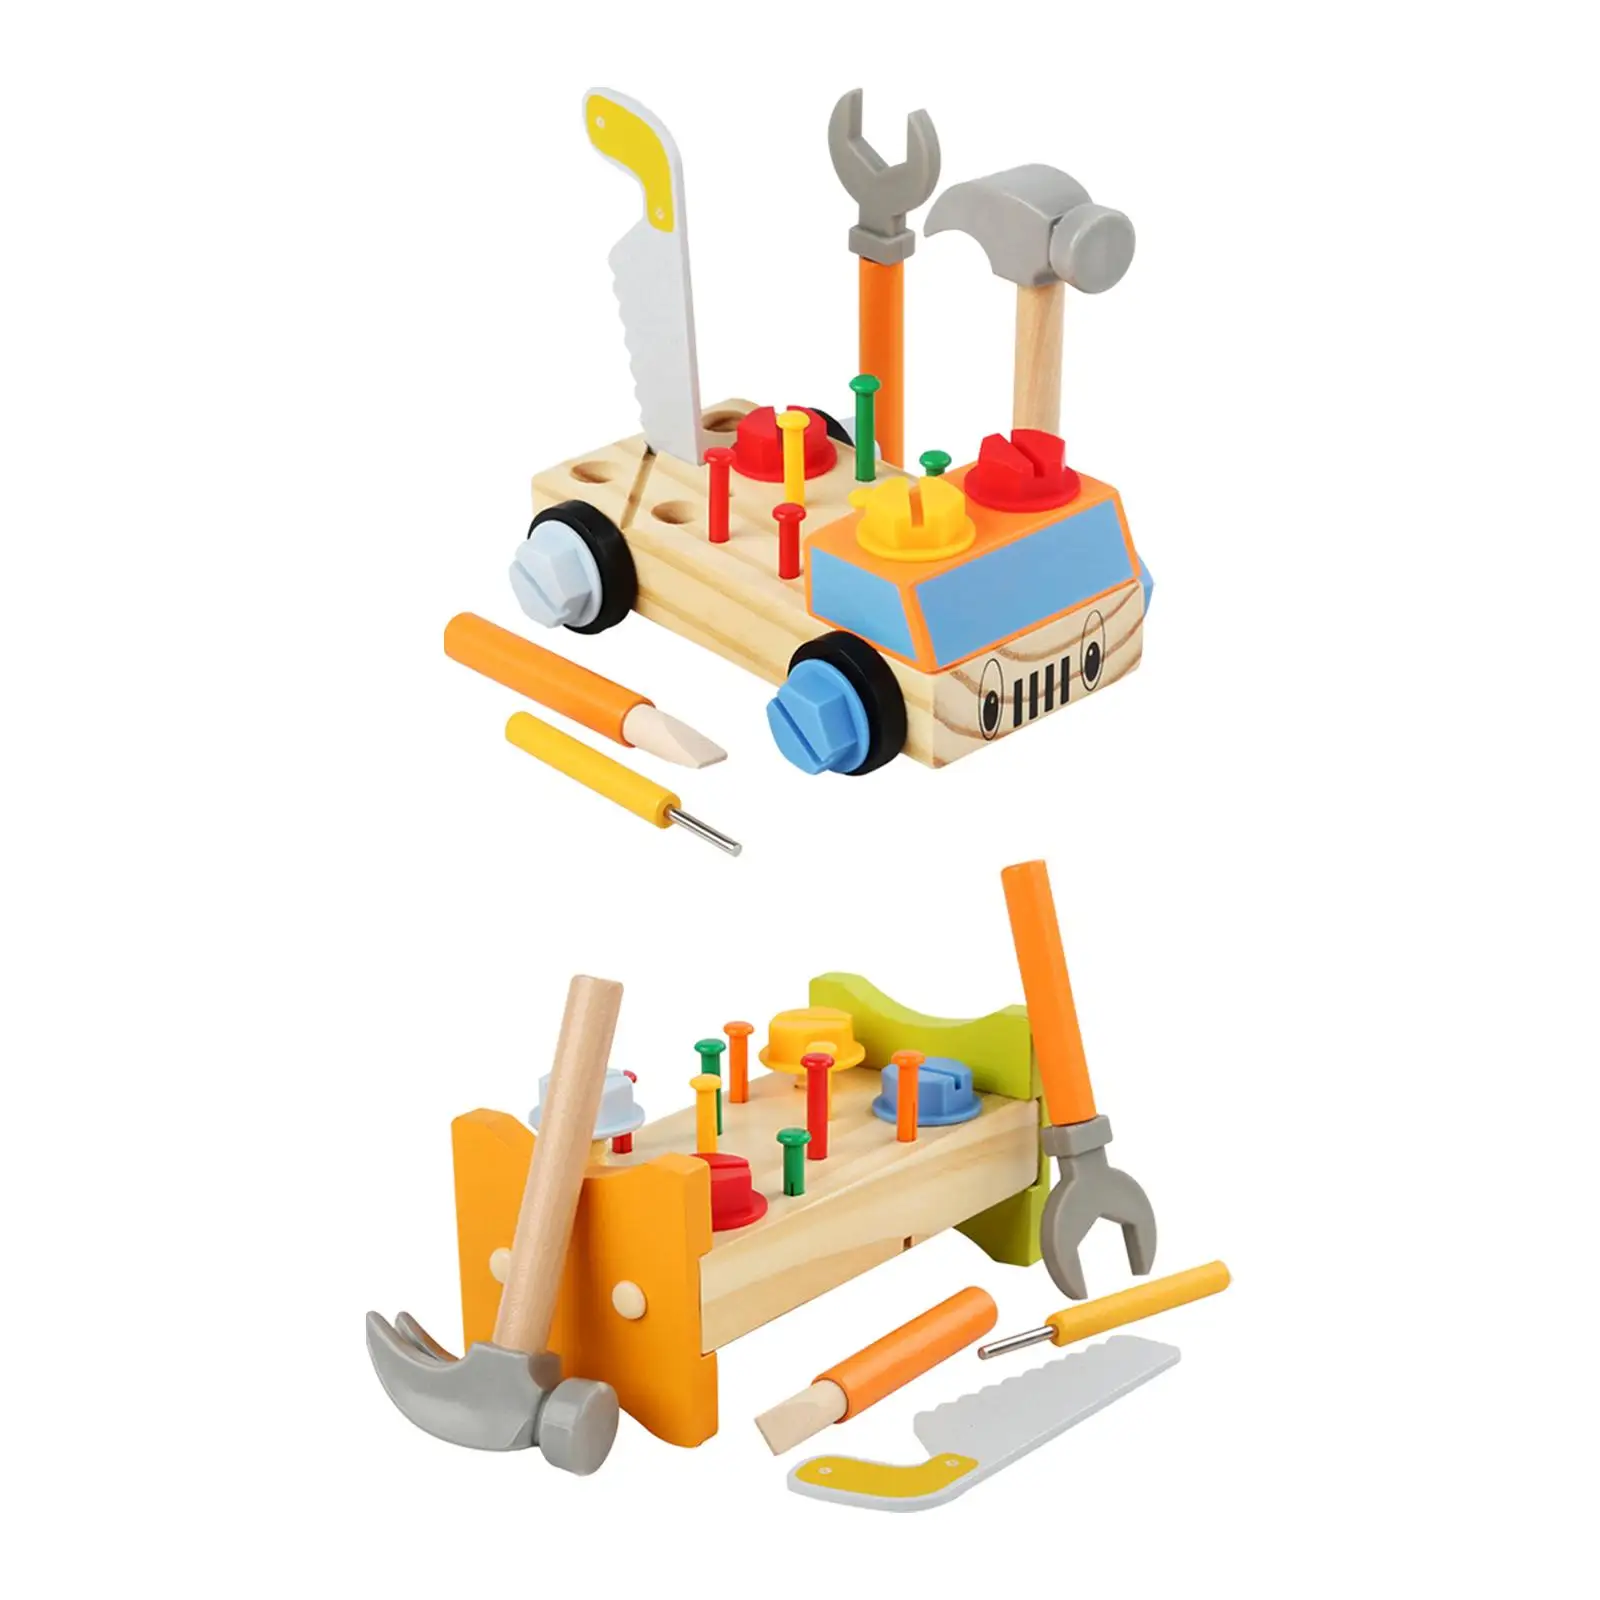 Wooden Play Tool Set Disassembly Toy Woodworking Repair Tools Children`s